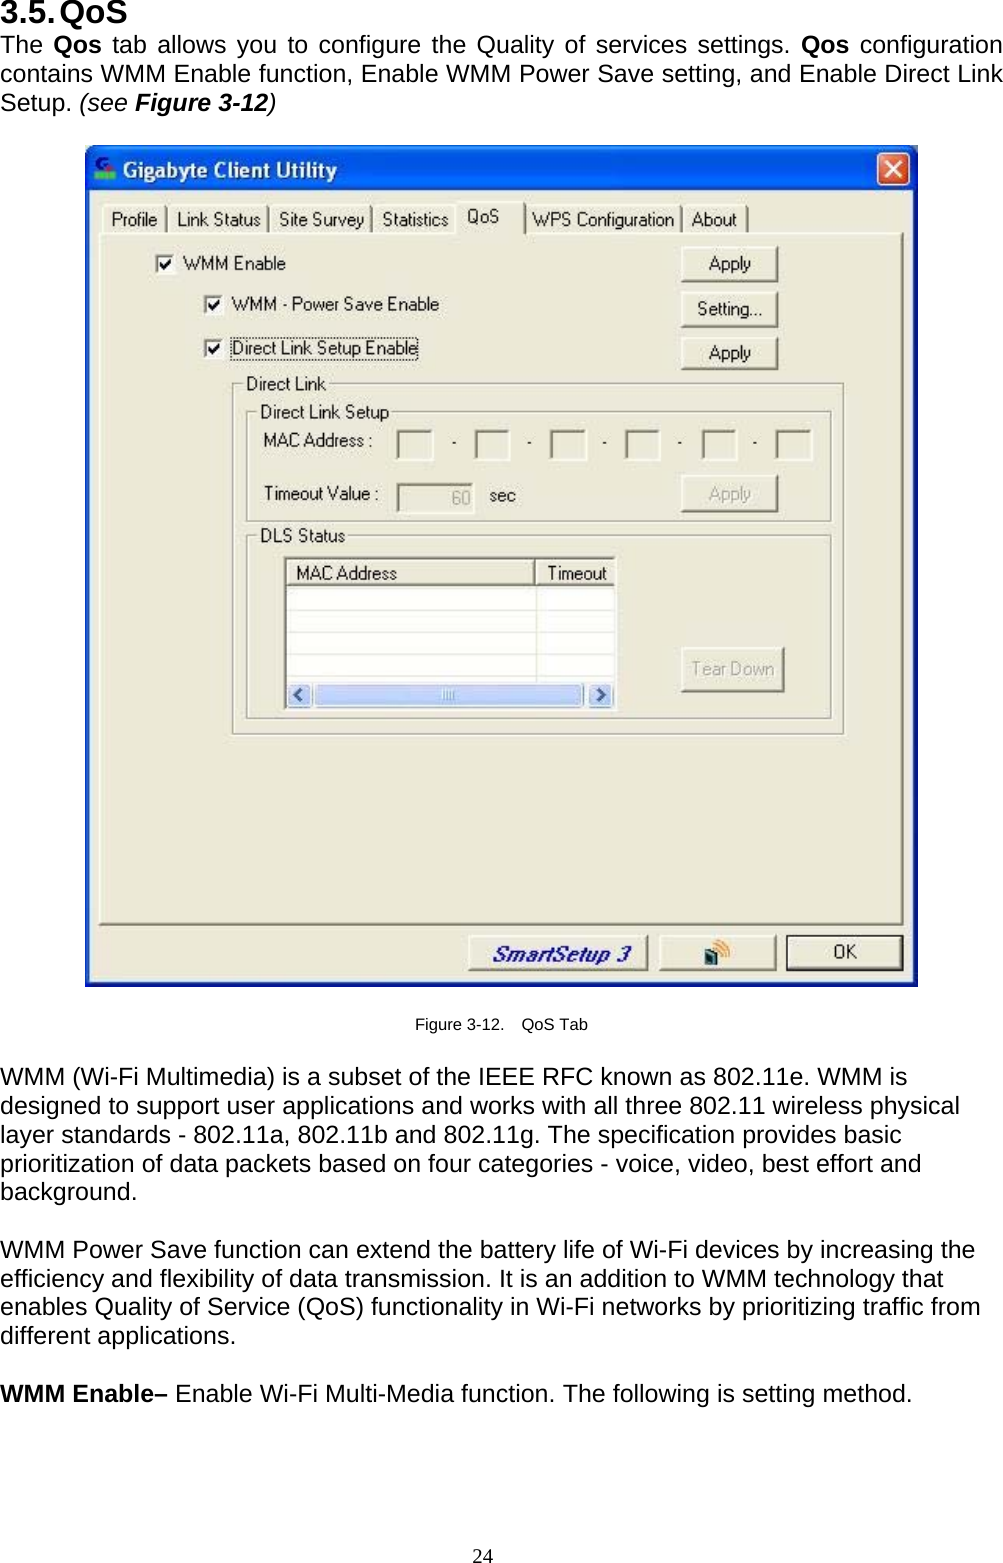 24   3.5. QoS The Qos tab allows you to configure the Quality of services settings. Qos configuration contains WMM Enable function, Enable WMM Power Save setting, and Enable Direct Link Setup. (see Figure 3-12)    Figure 3-12.  QoS Tab  WMM (Wi-Fi Multimedia) is a subset of the IEEE RFC known as 802.11e. WMM is designed to support user applications and works with all three 802.11 wireless physical layer standards - 802.11a, 802.11b and 802.11g. The specification provides basic prioritization of data packets based on four categories - voice, video, best effort and background.   WMM Power Save function can extend the battery life of Wi-Fi devices by increasing the efficiency and flexibility of data transmission. It is an addition to WMM technology that enables Quality of Service (QoS) functionality in Wi-Fi networks by prioritizing traffic from different applications.  WMM Enable– Enable Wi-Fi Multi-Media function. The following is setting method.  